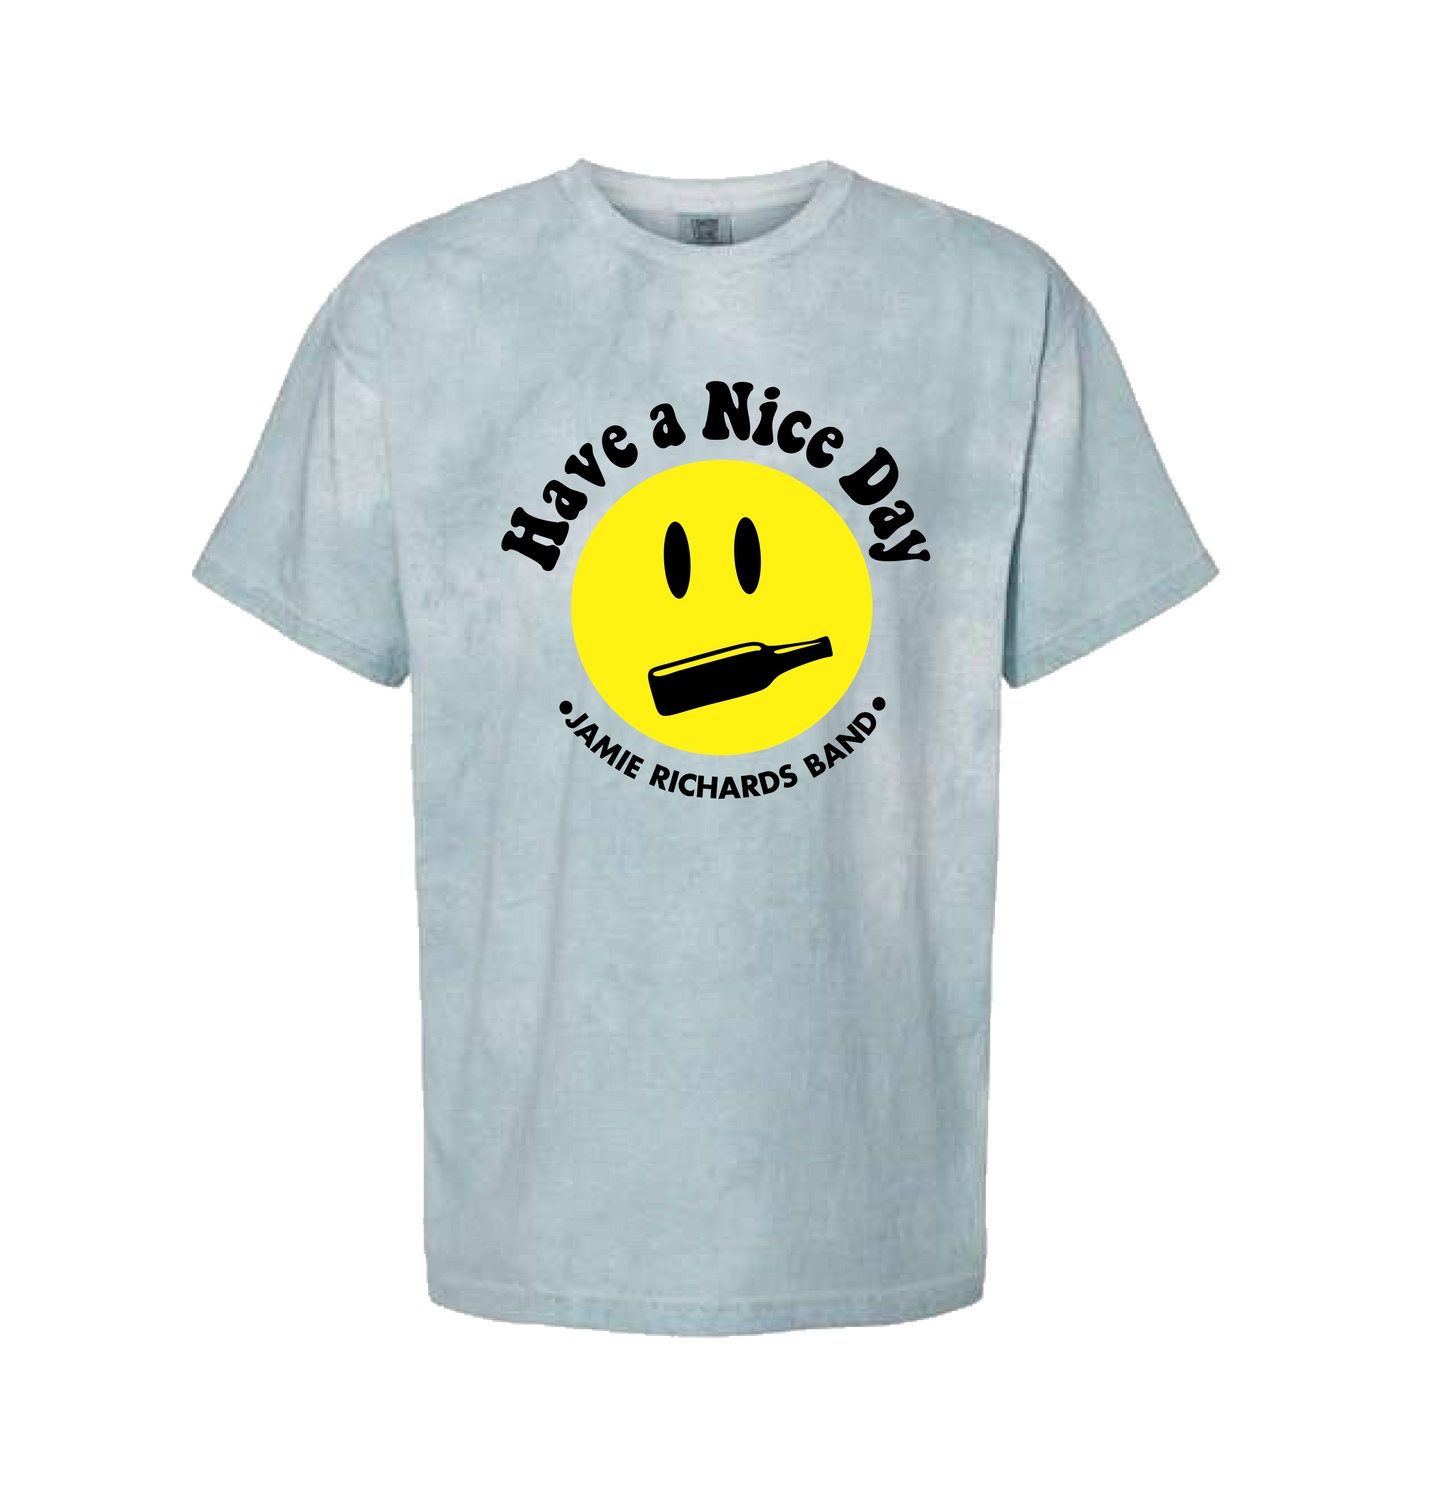 Have A Nice Day T-Shirt